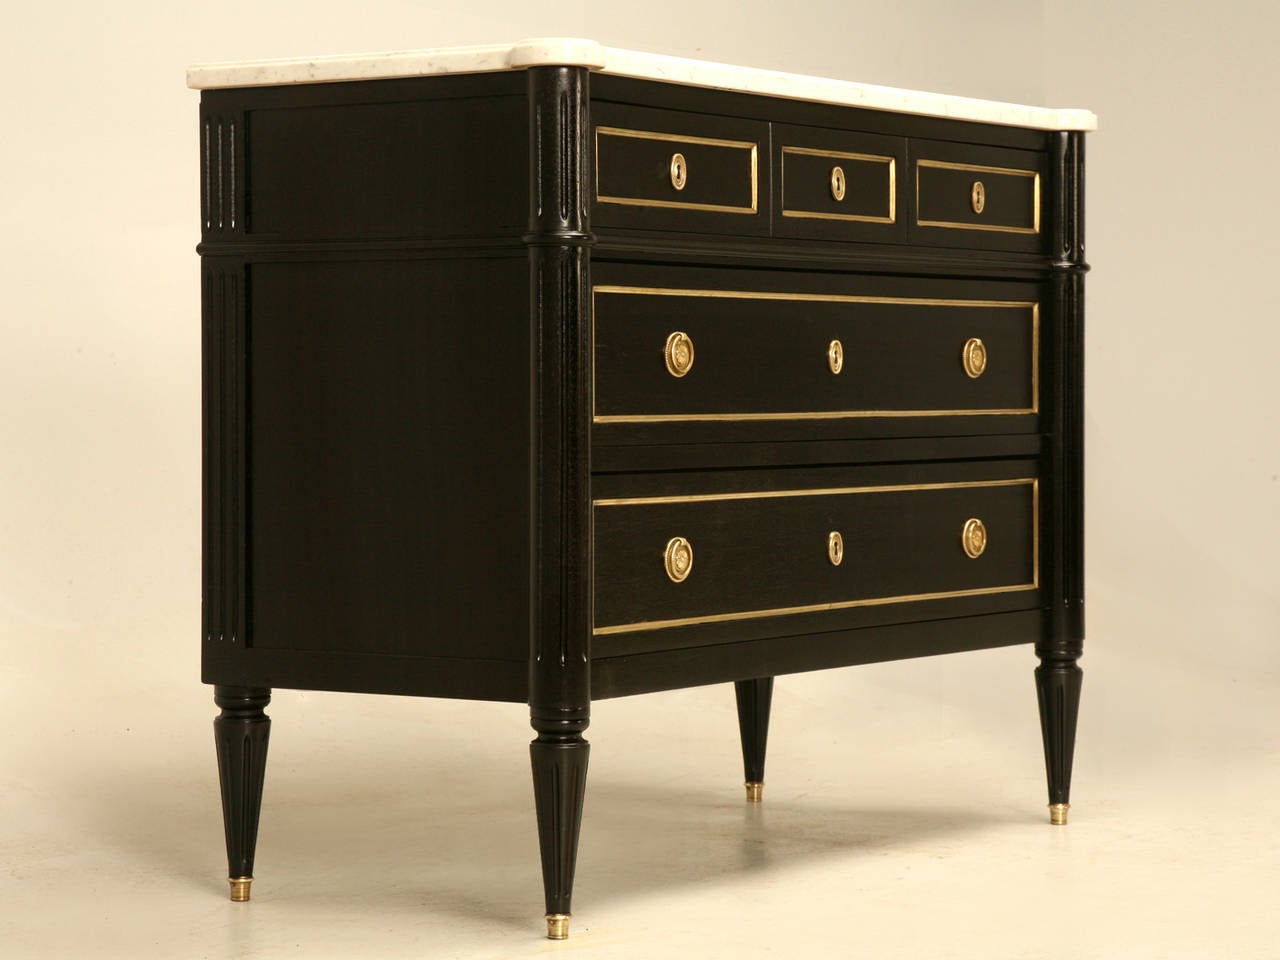 Classic Louis XVI style French commode done in a Jansen inspired rich ebonized black finish. Our Old Plank restoration department stripped the finish by hand, scrapping the entire chest, while using no chemicals. We then carefully applied several